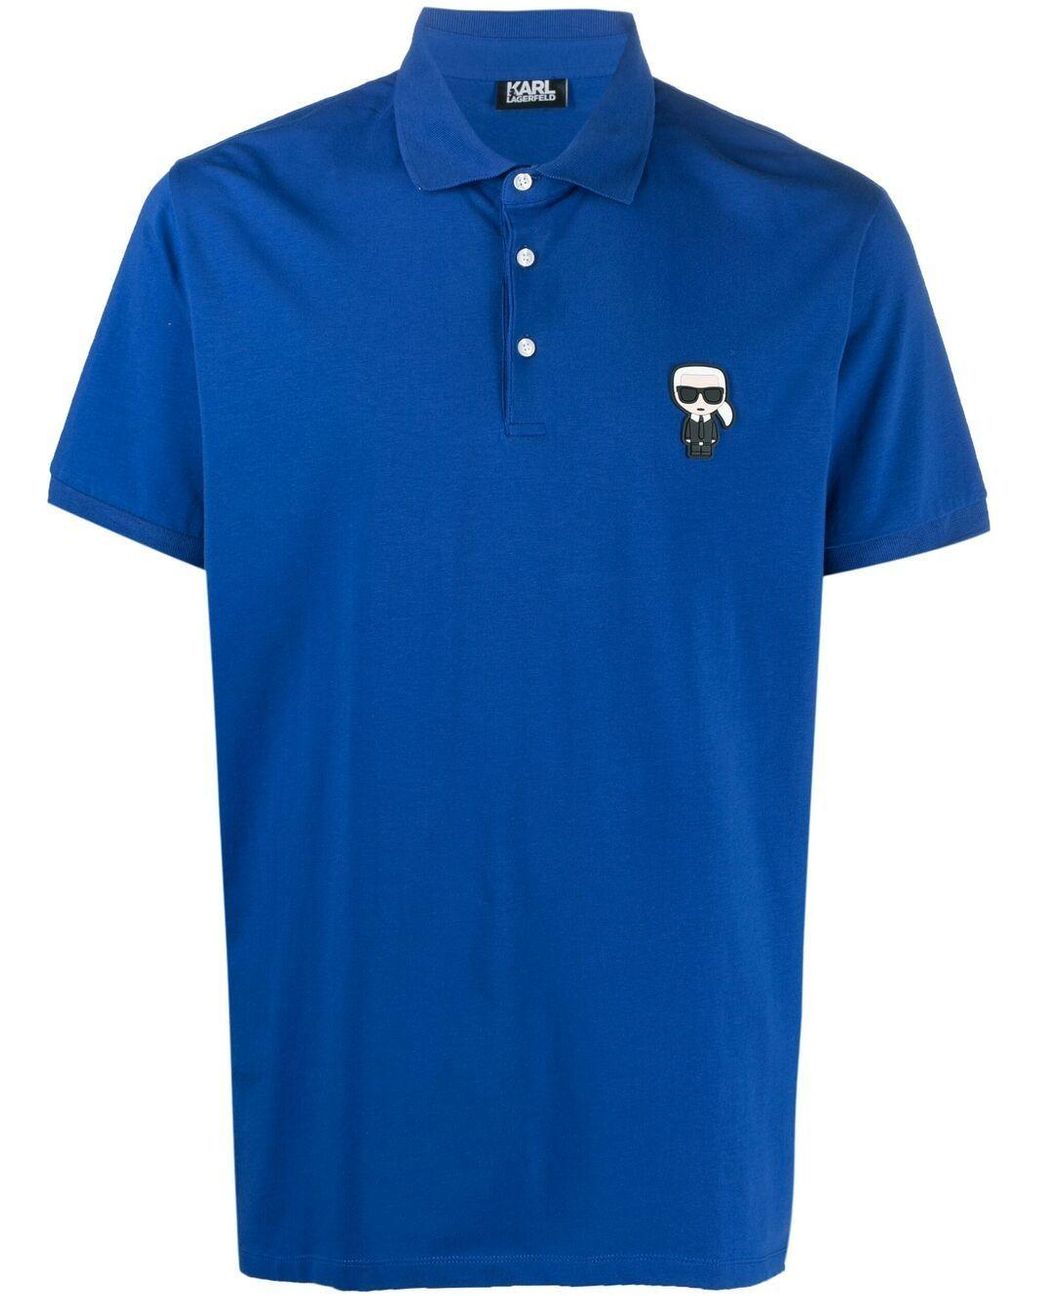 Karl Lagerfeld Ikonik Stretch-cotton Polo Shirt in Blue for Men - Lyst